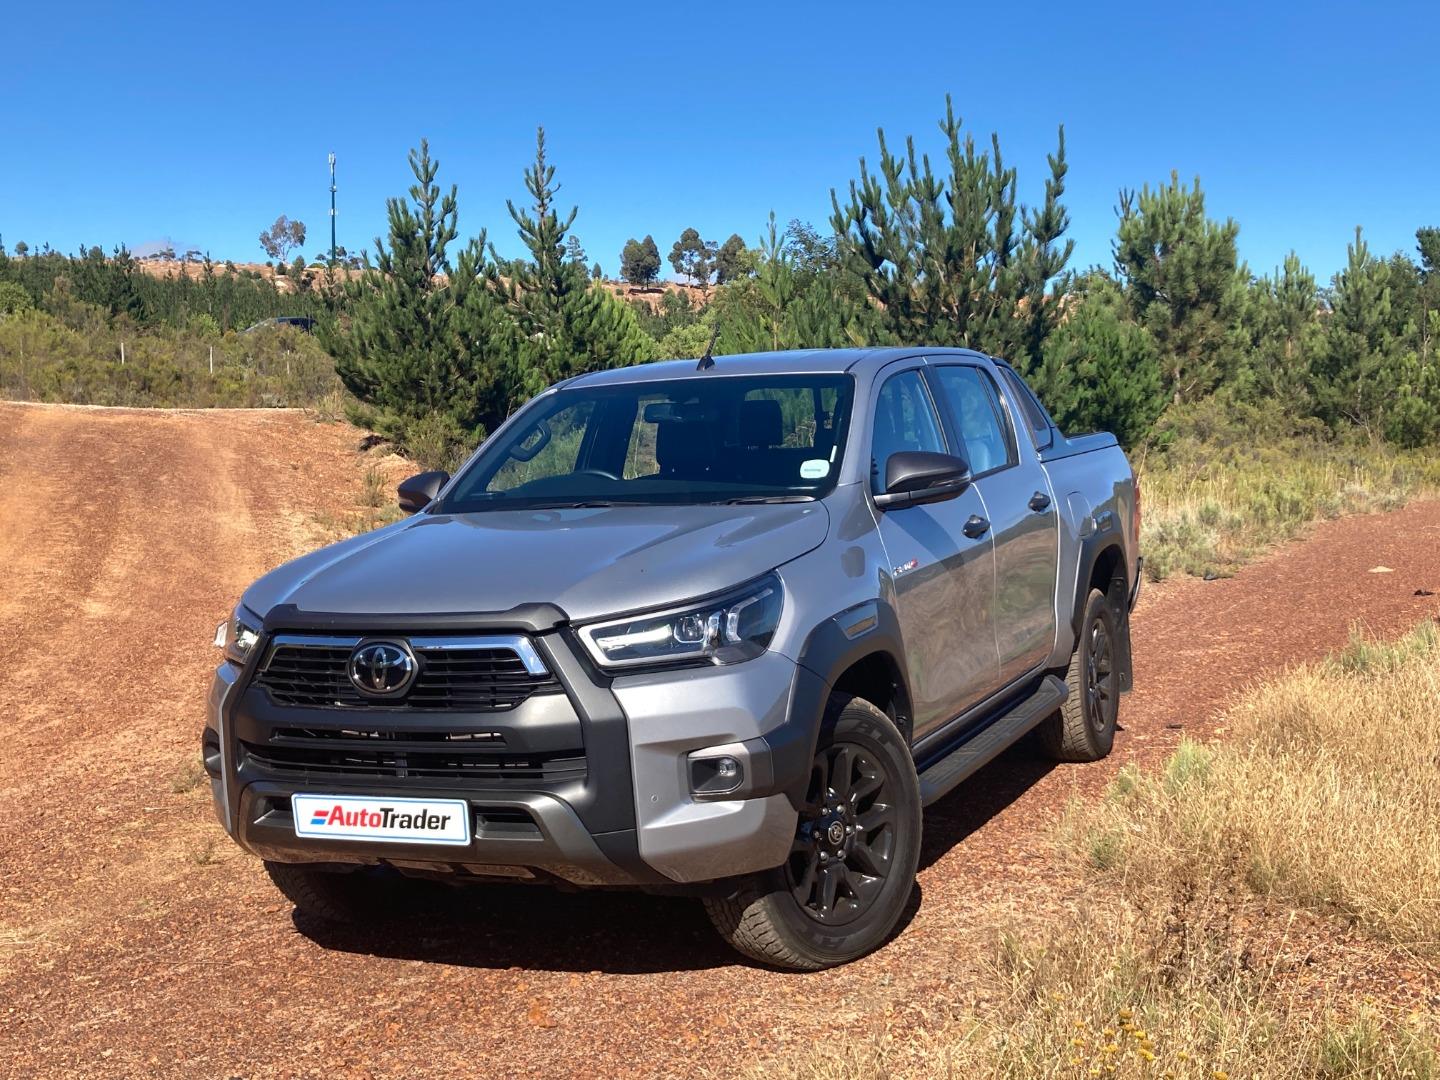 Is The Toyota Hilux Legend Good For New Drivers Buying A Car